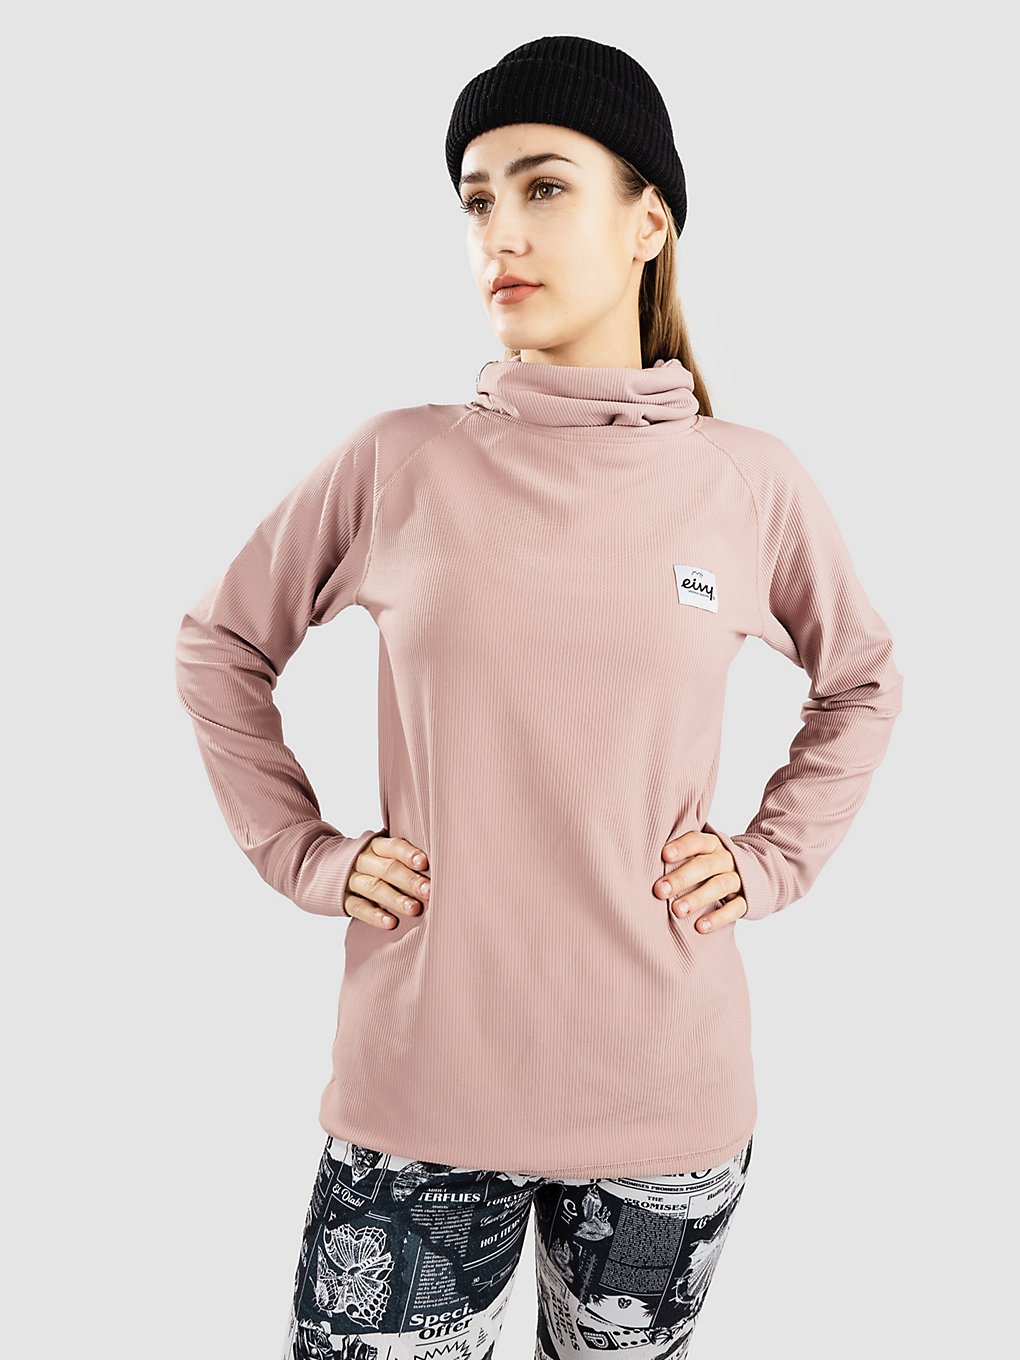 Eivy Icecold Gaiter Rib Base Layer Top faded wood kaufen